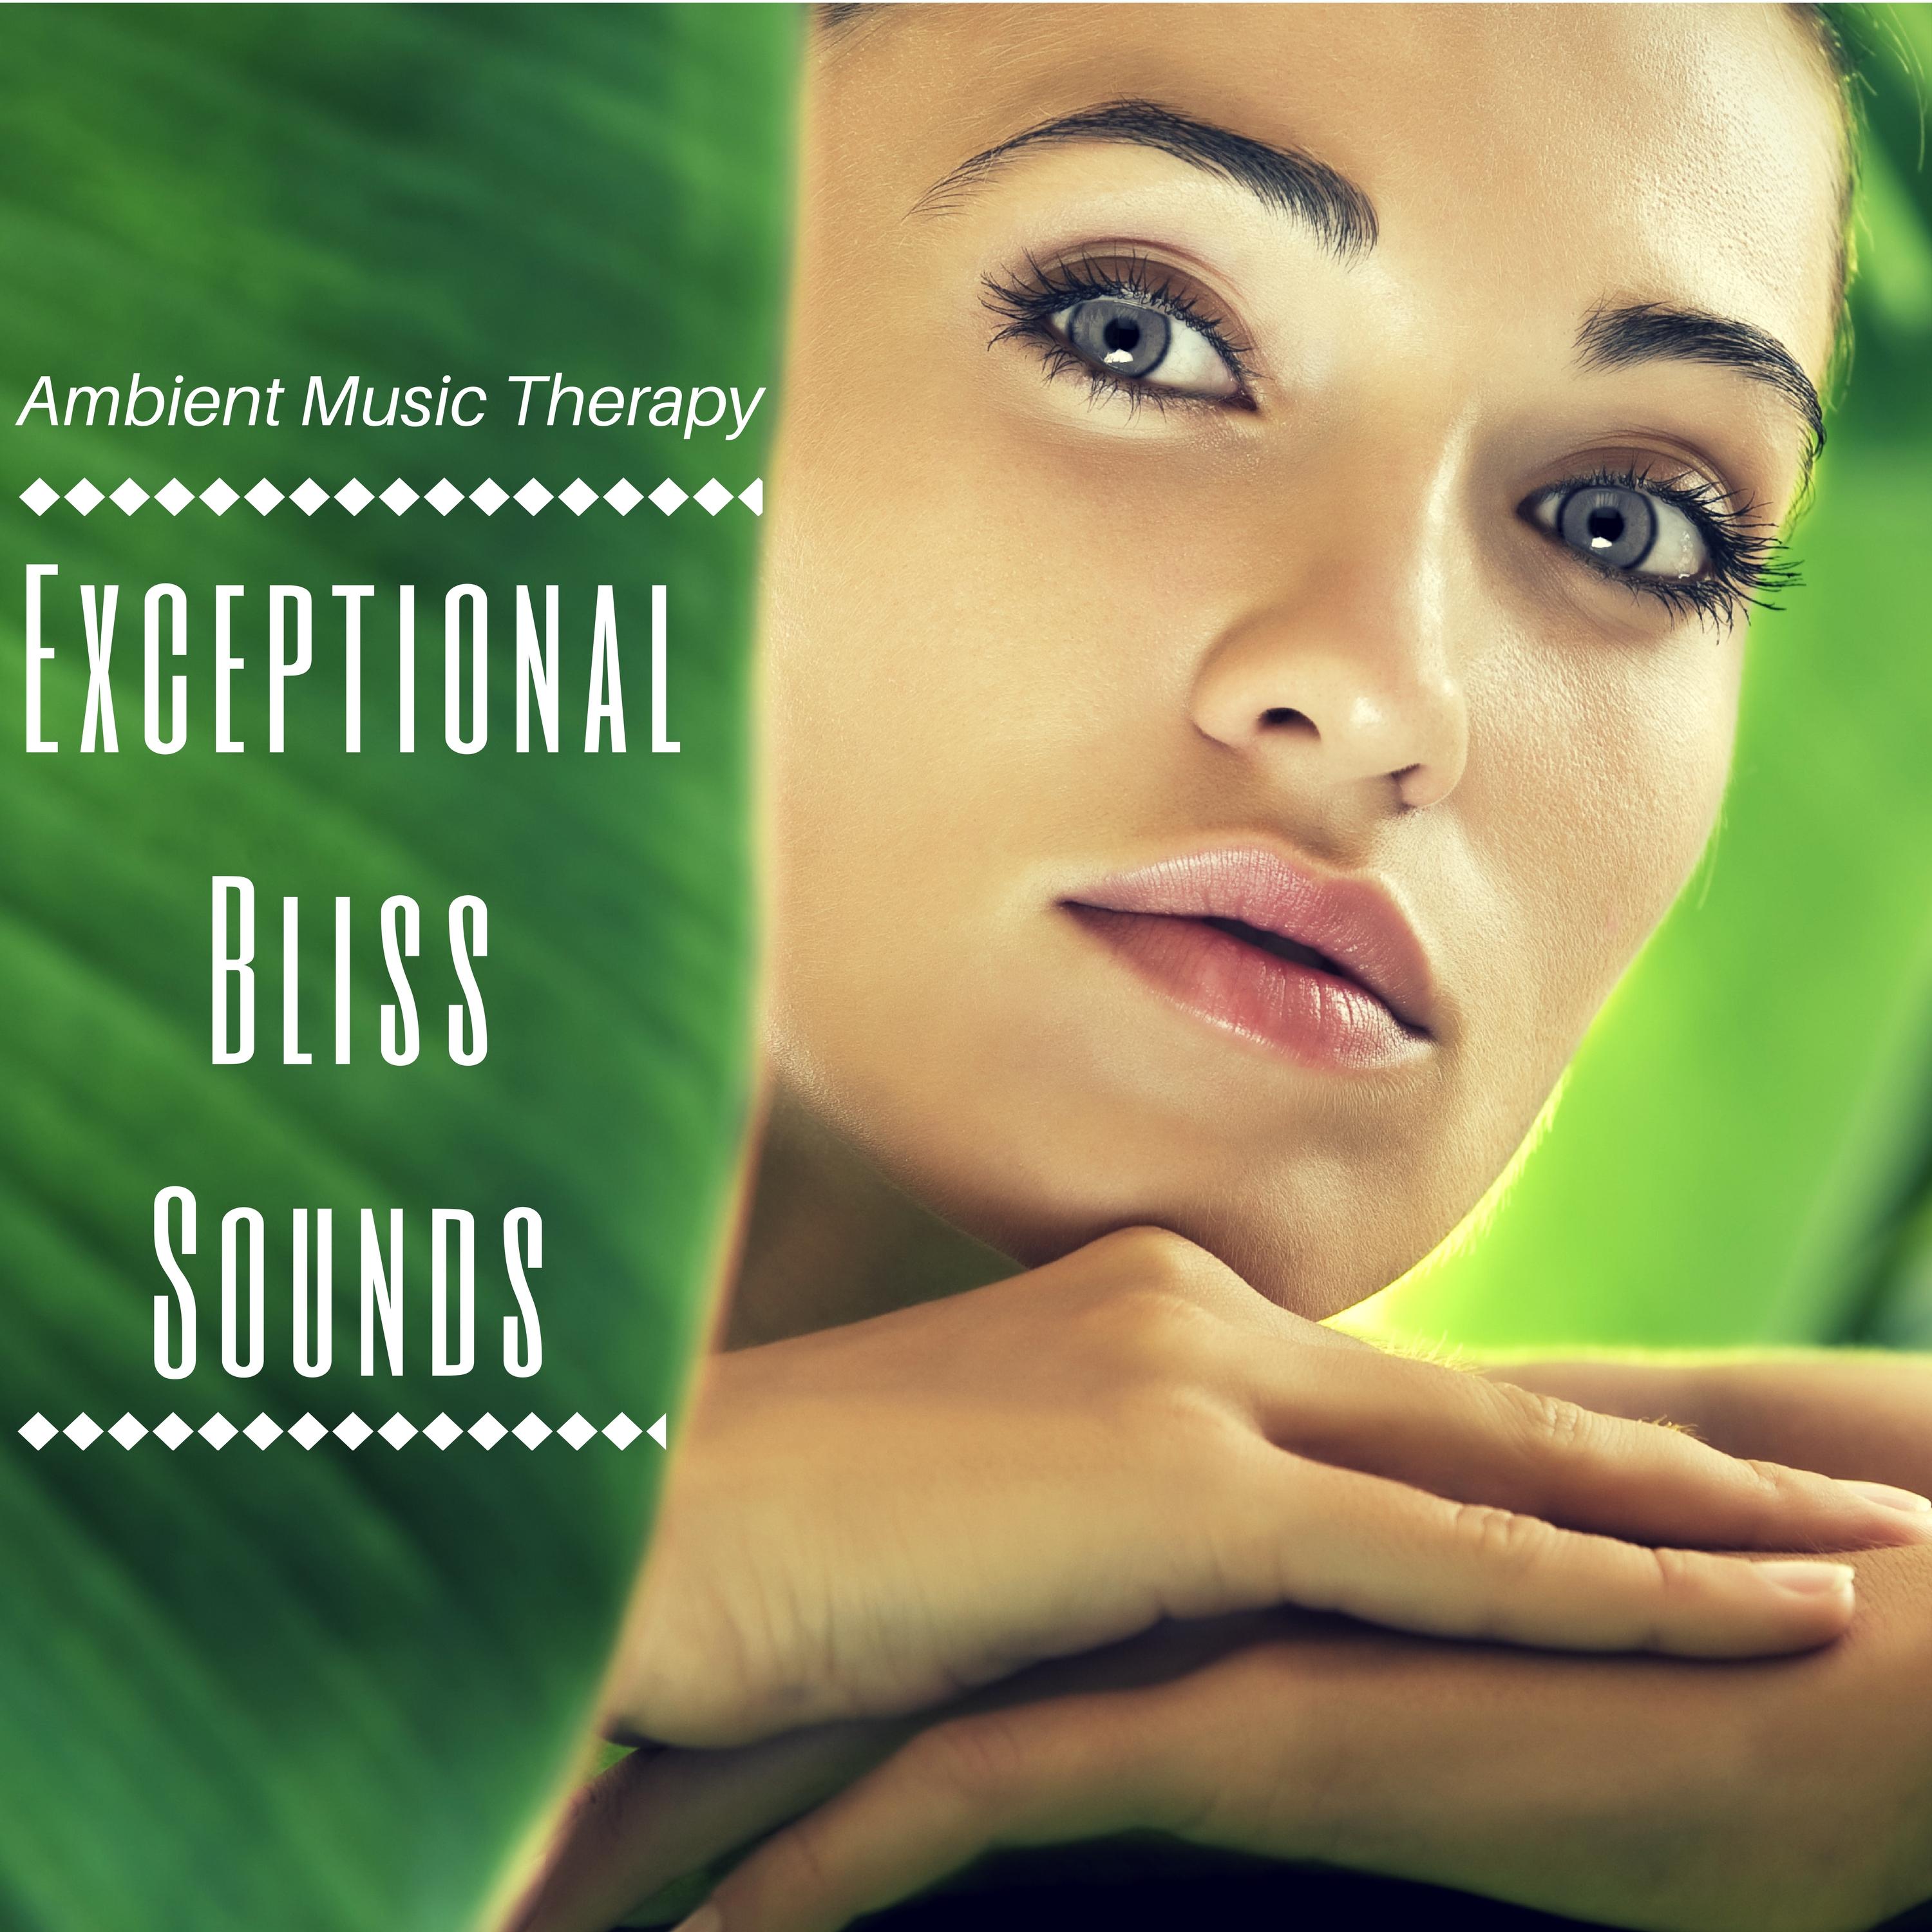 Exceptional Bliss Sounds: Ambient Music Therapy with Hypnotic Ambience for Serenity